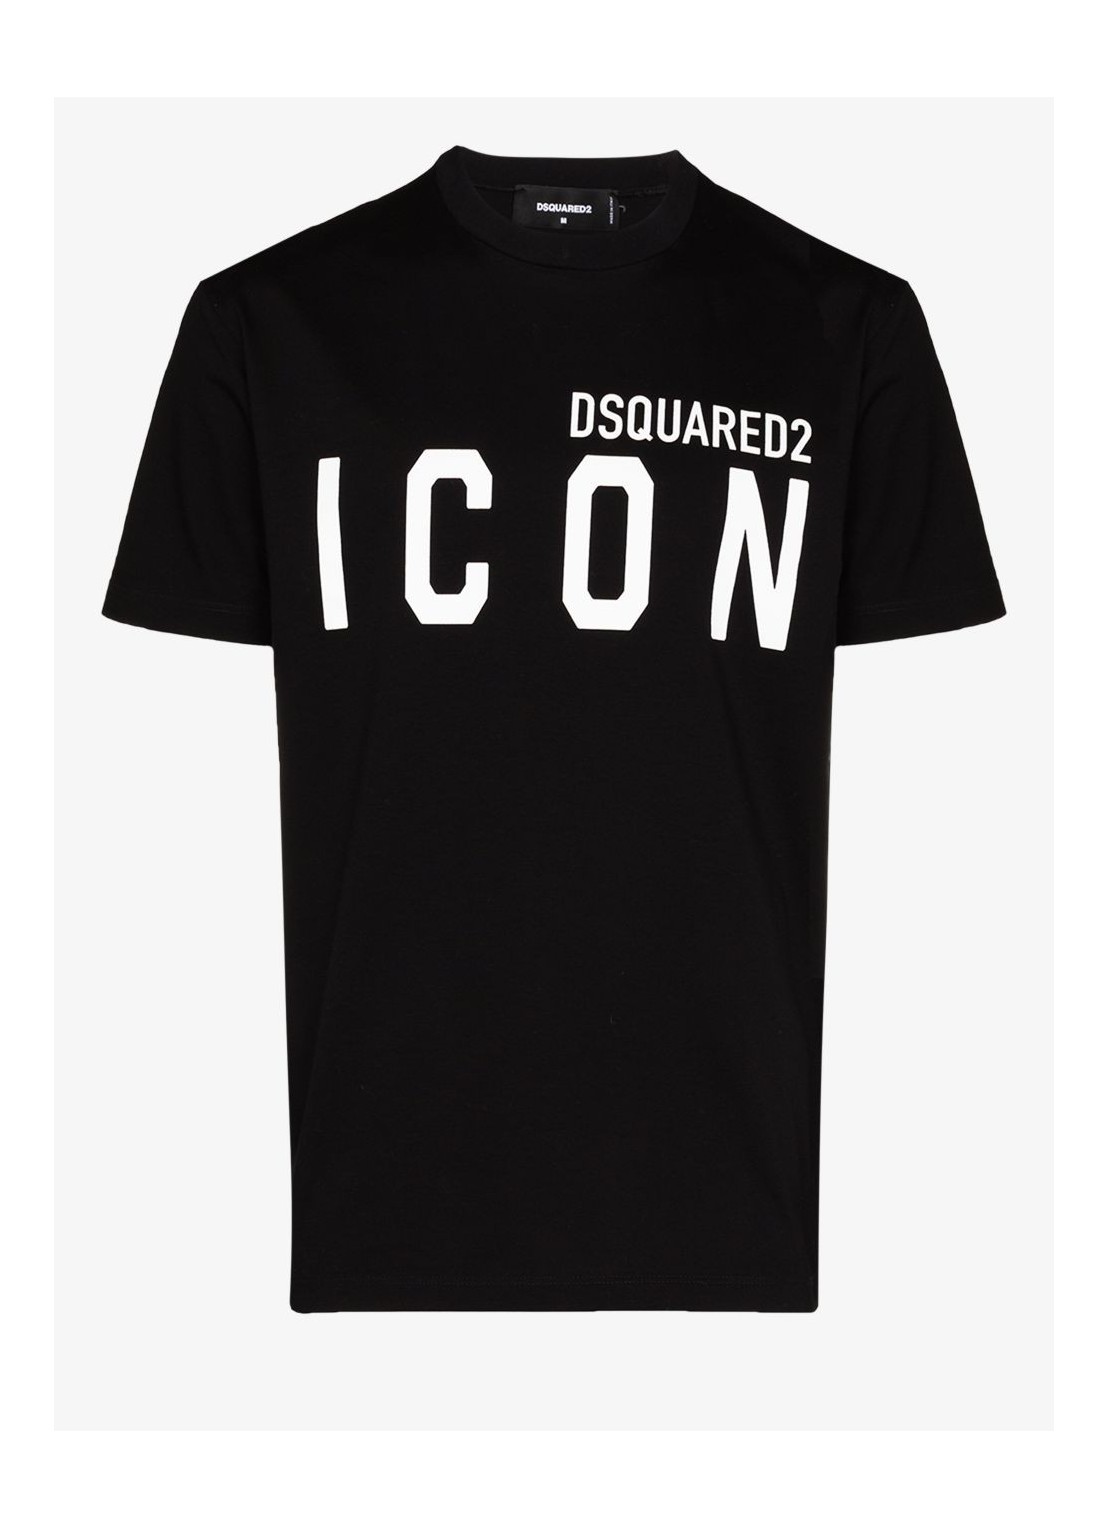 Camiseta dsquared t-shirt man cool fit s79gc0003s23009 980 talla S
 